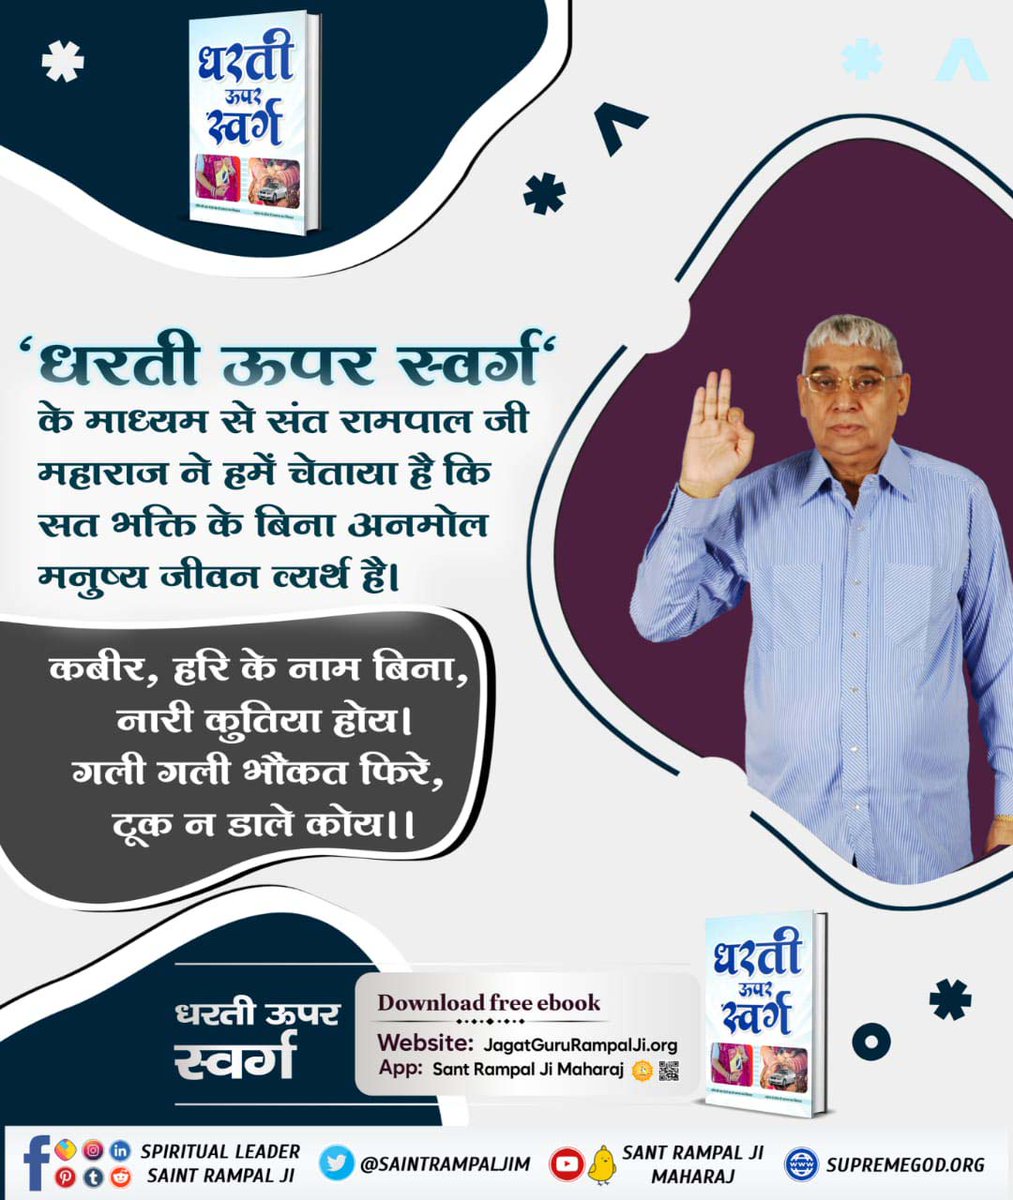 #धरती_को_स्वर्ग_बनाना_है Through the book 'Dharti Per Swarg,' one can learn the correct ritual for marriage. Additionally, it reveals which marriage customs are harmful to humanity. Sant Rampal Ji Maharaj